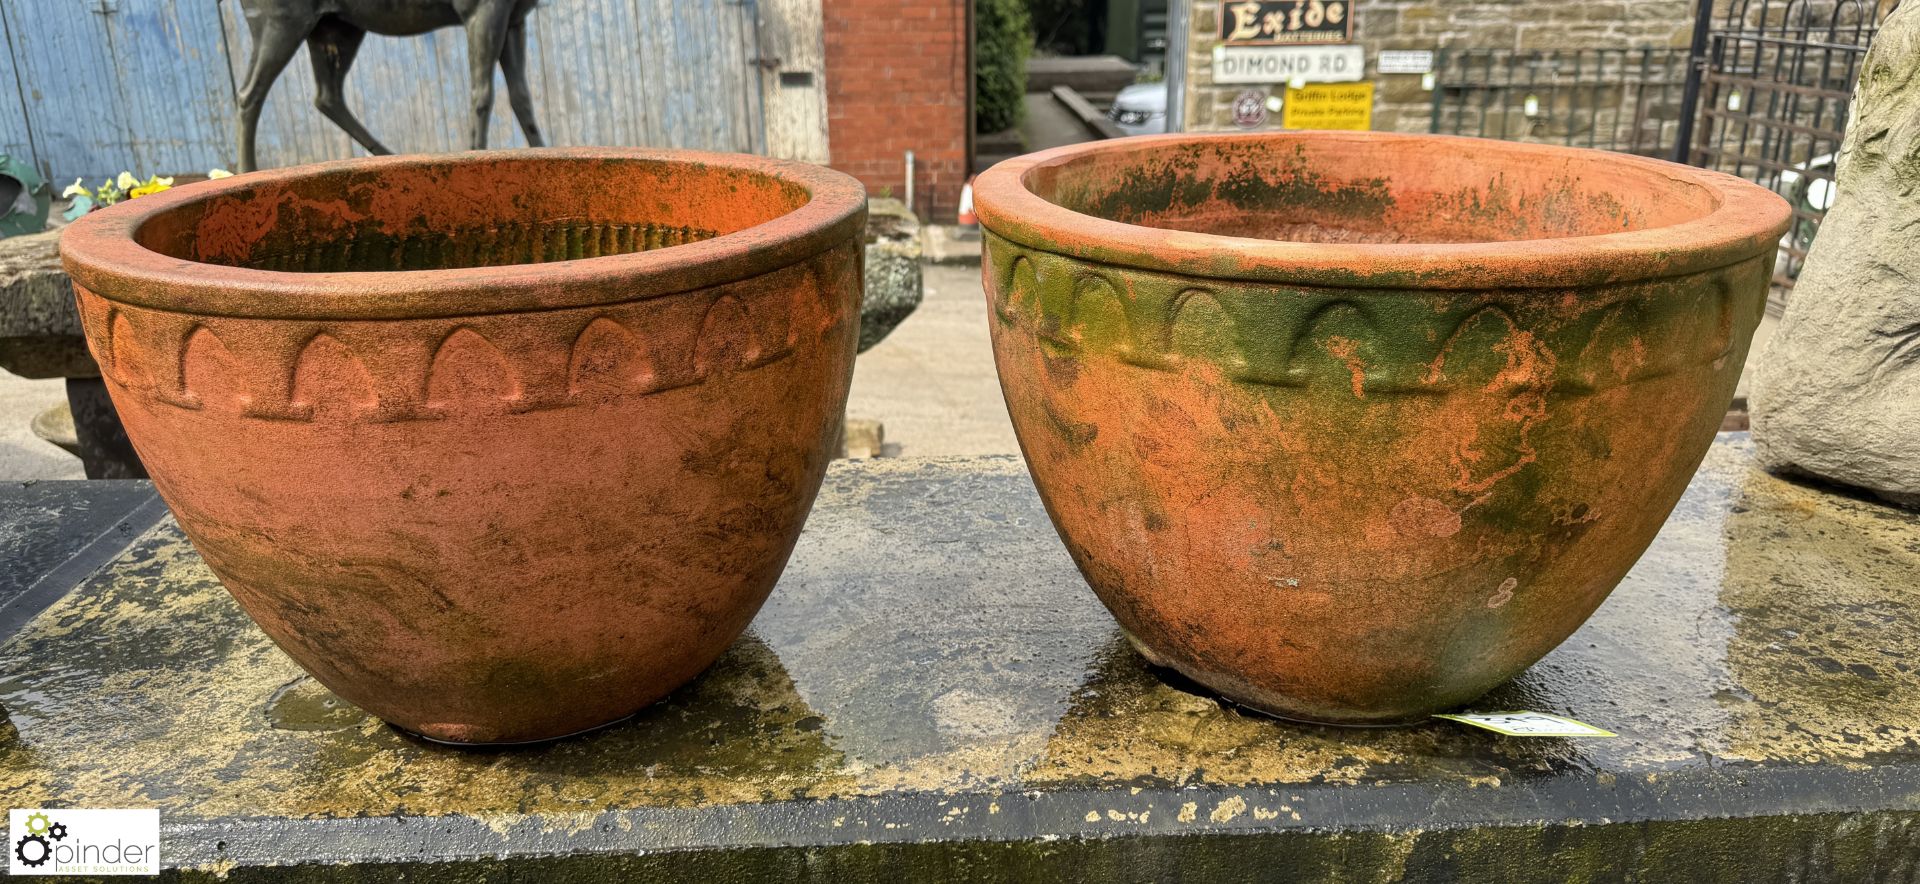 A pair large terracotta Planters, with arrowhead decoration, approx. 12.5in x 19in diameter, circa